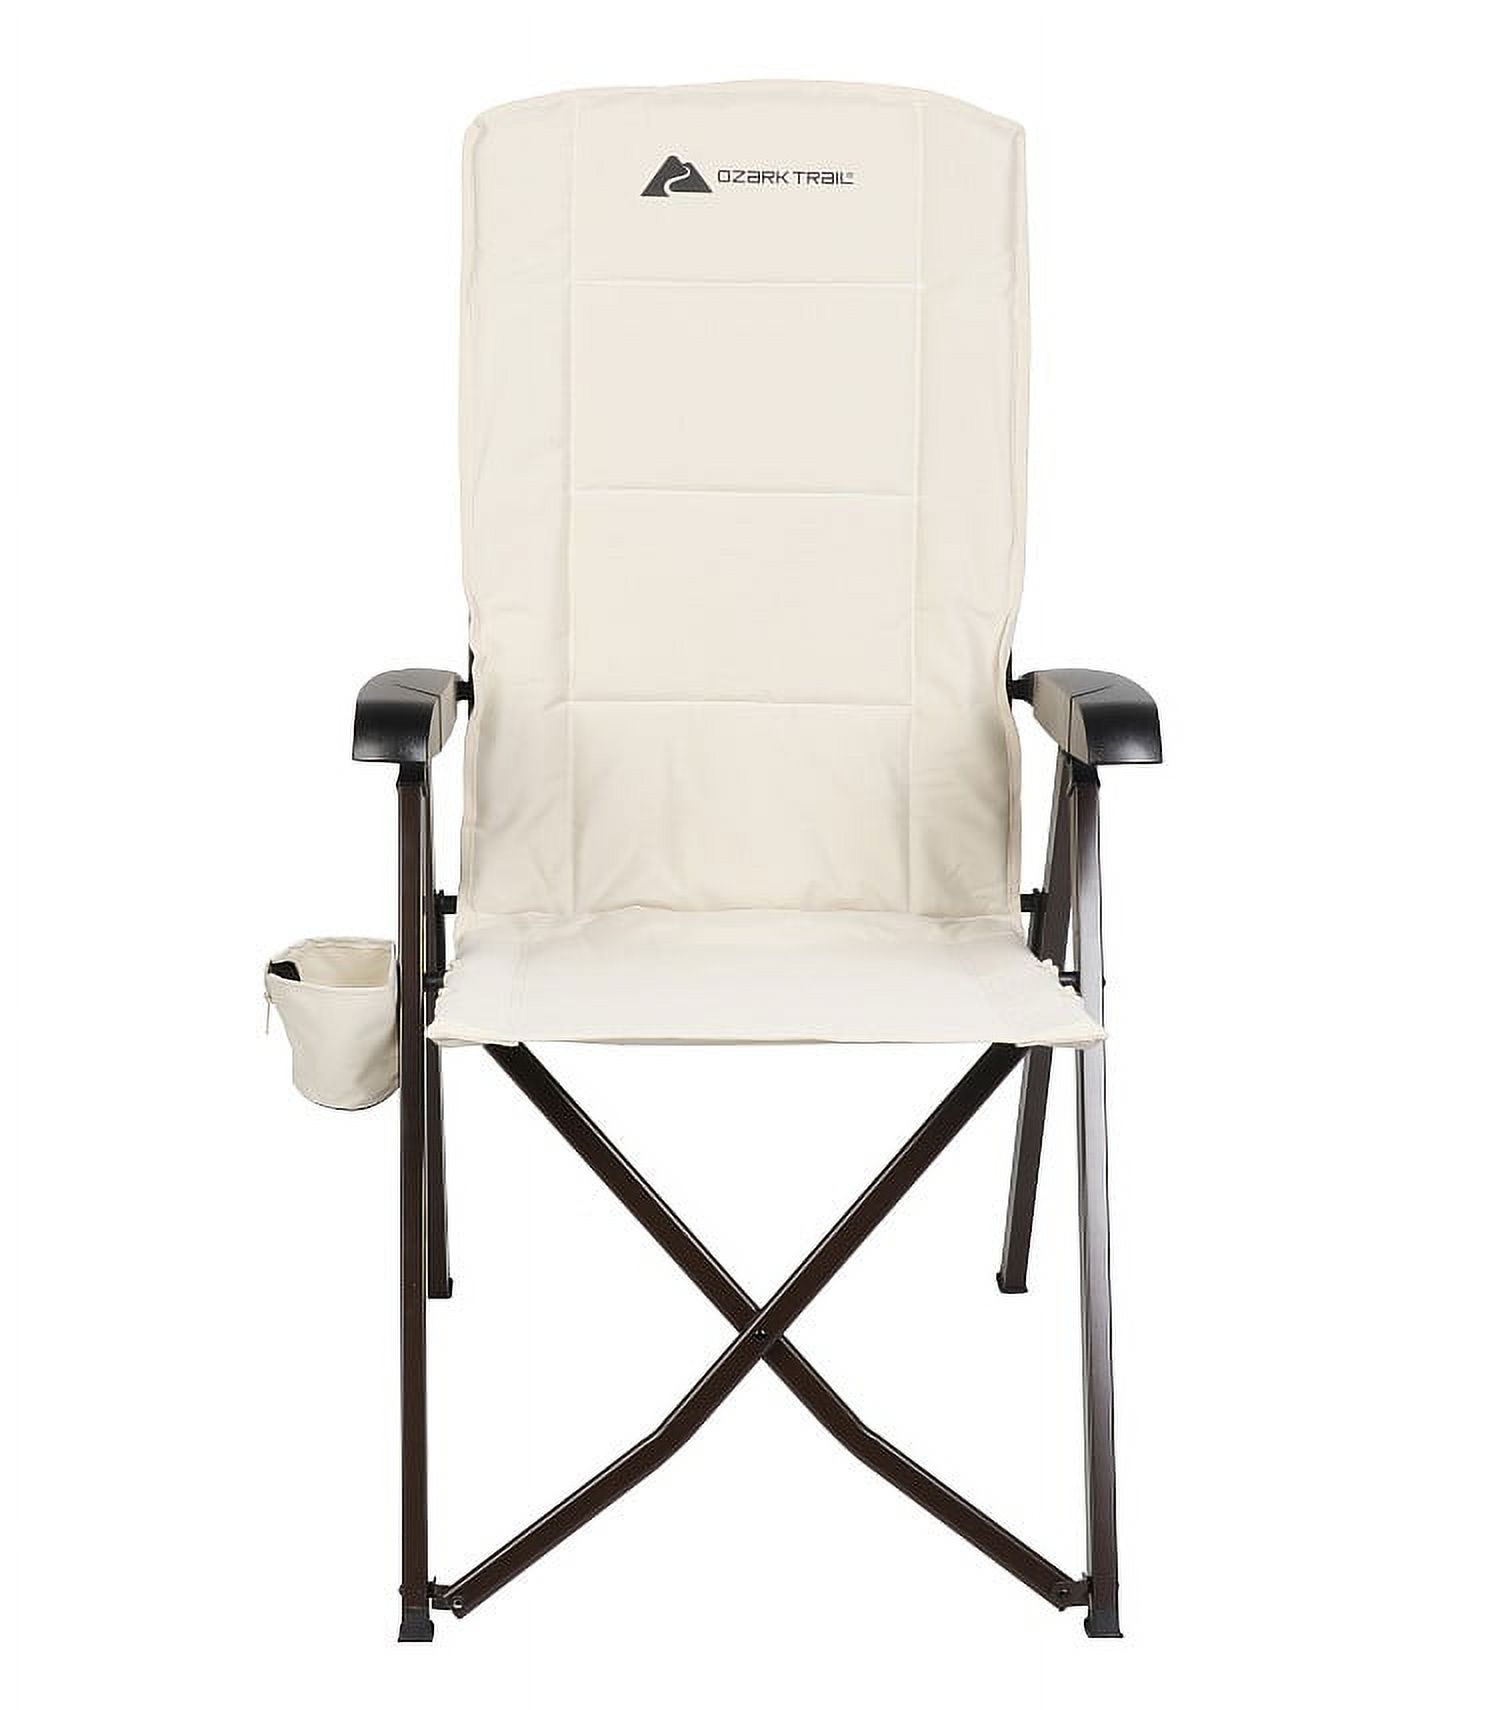 Ozark Trail Glamp High Back Lounge Chair, Adult, Taupe - image 1 of 7